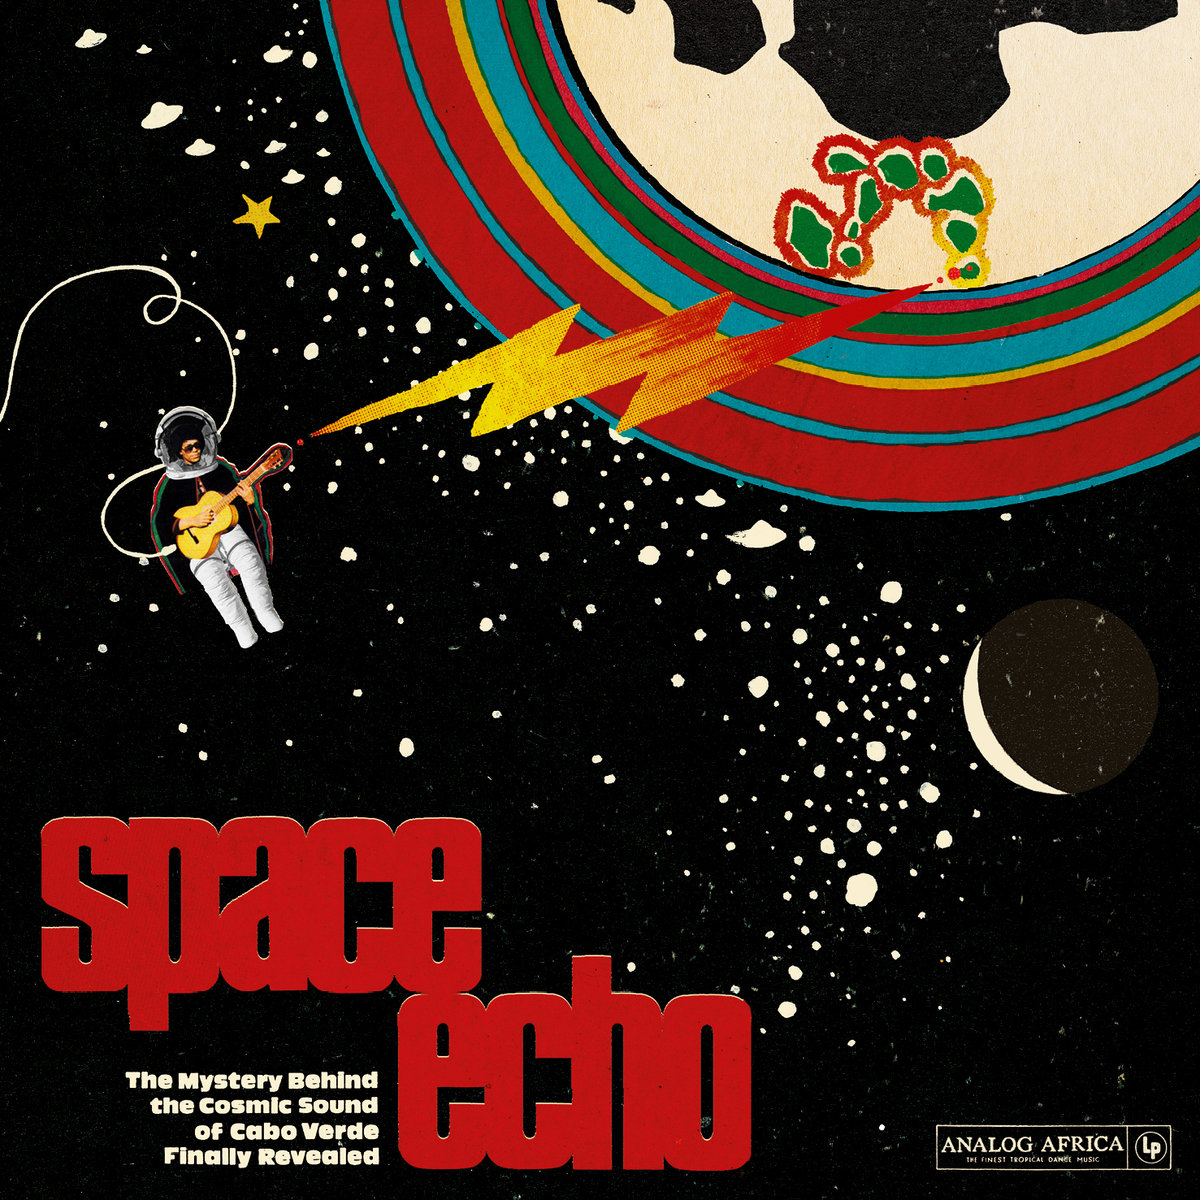 Album of the Week: Various Artists – Space Echo The Cosmic sound of Cape Verde 1977 -1985